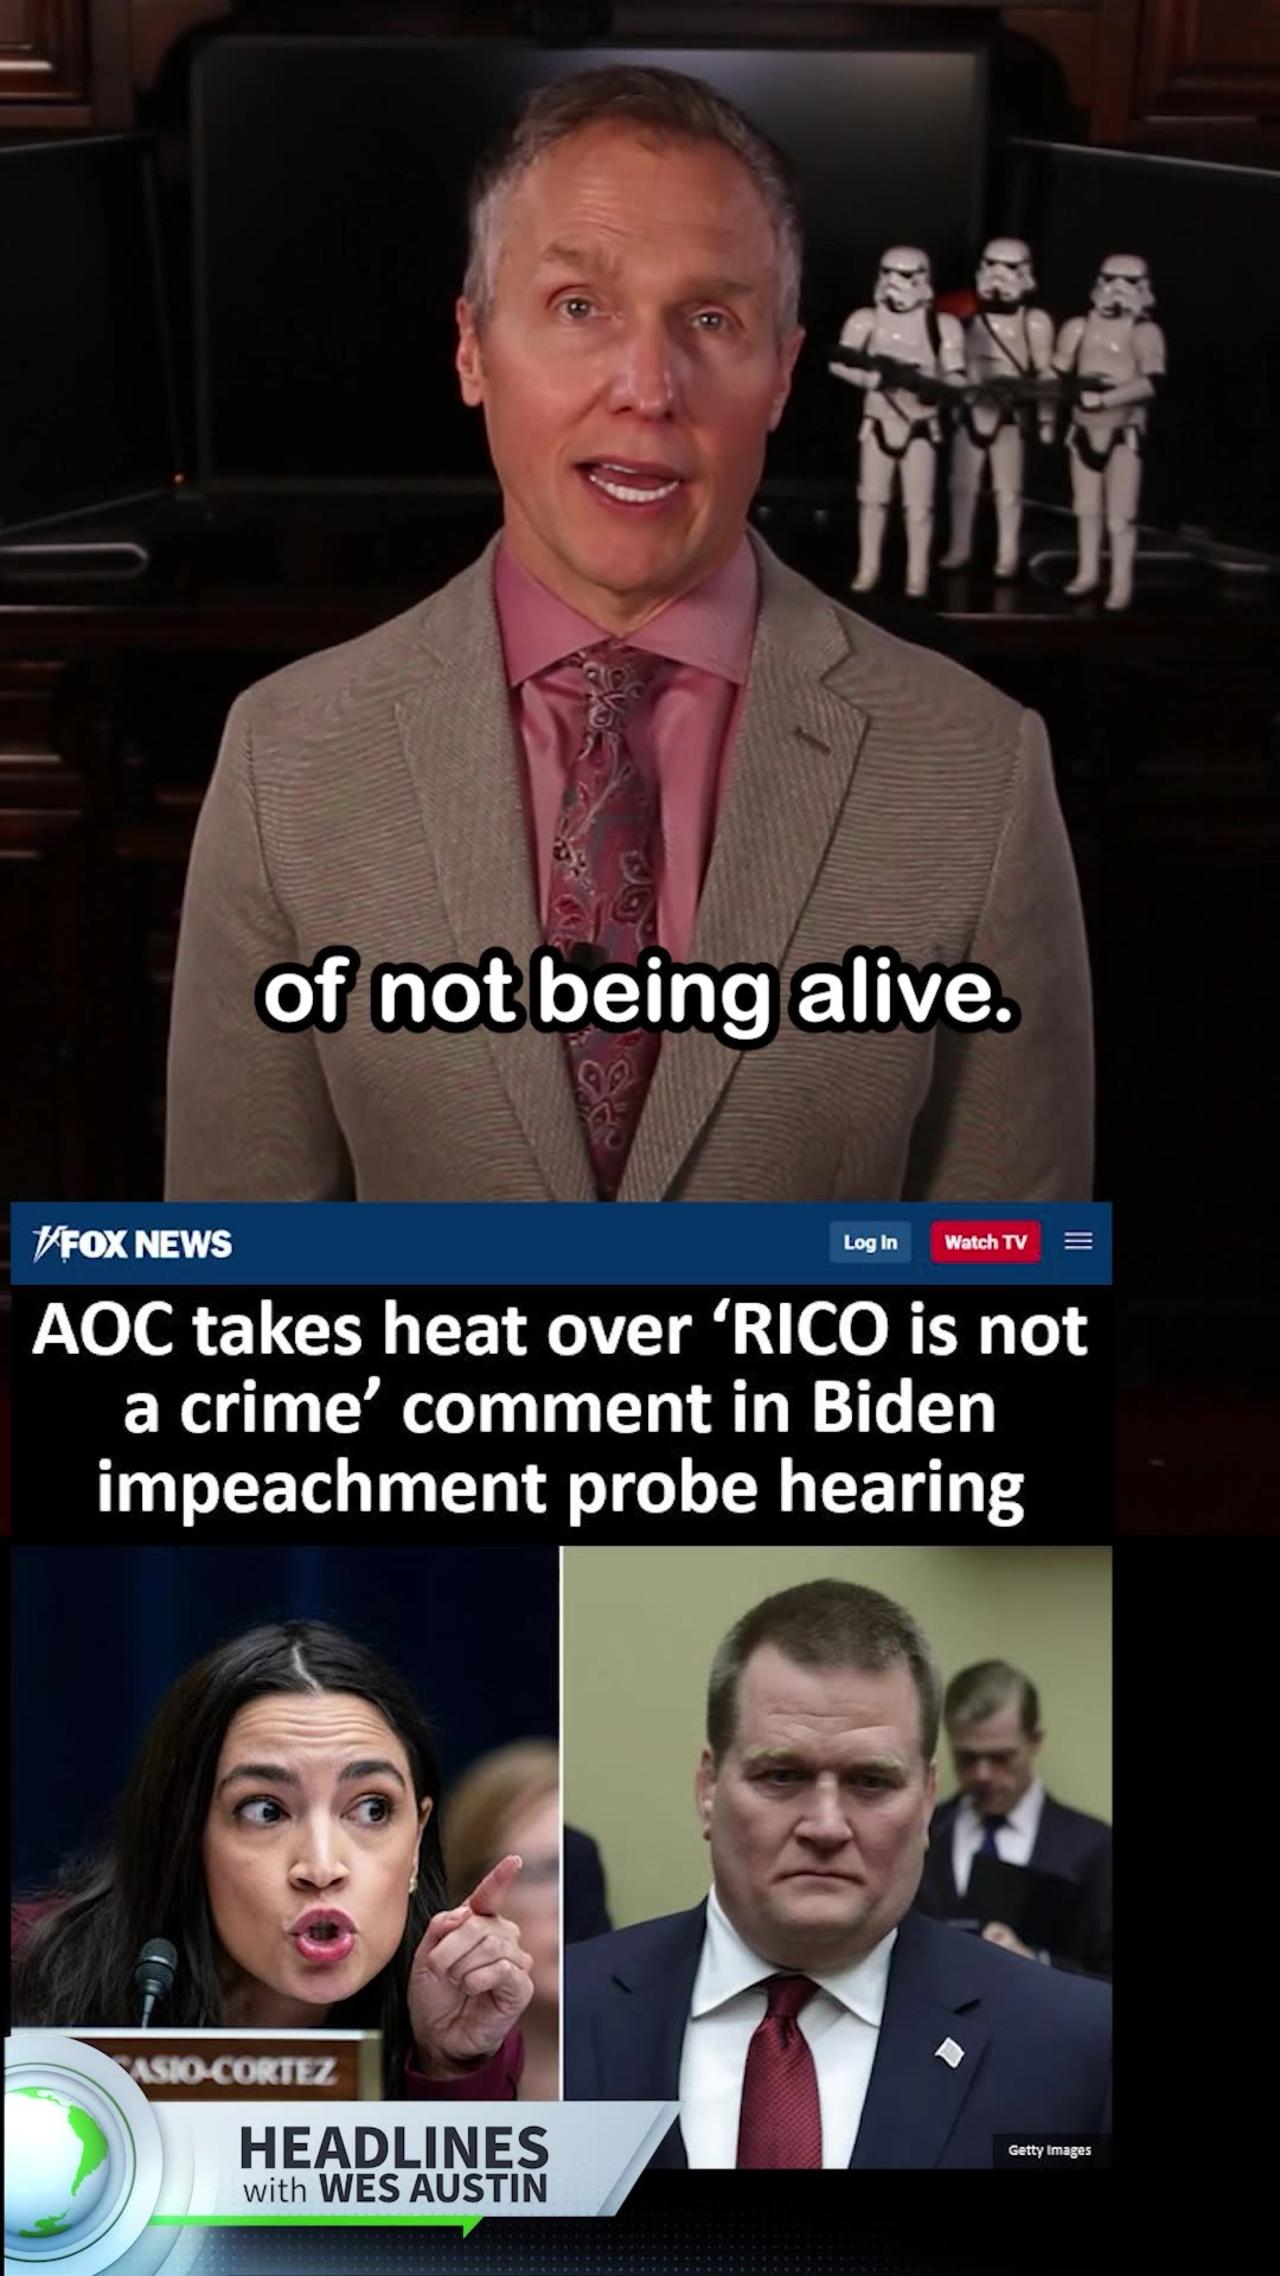 AOC Says 'RICO Is Not a Crime' in Biden Impeachment Hearing with Tony Bobulinski